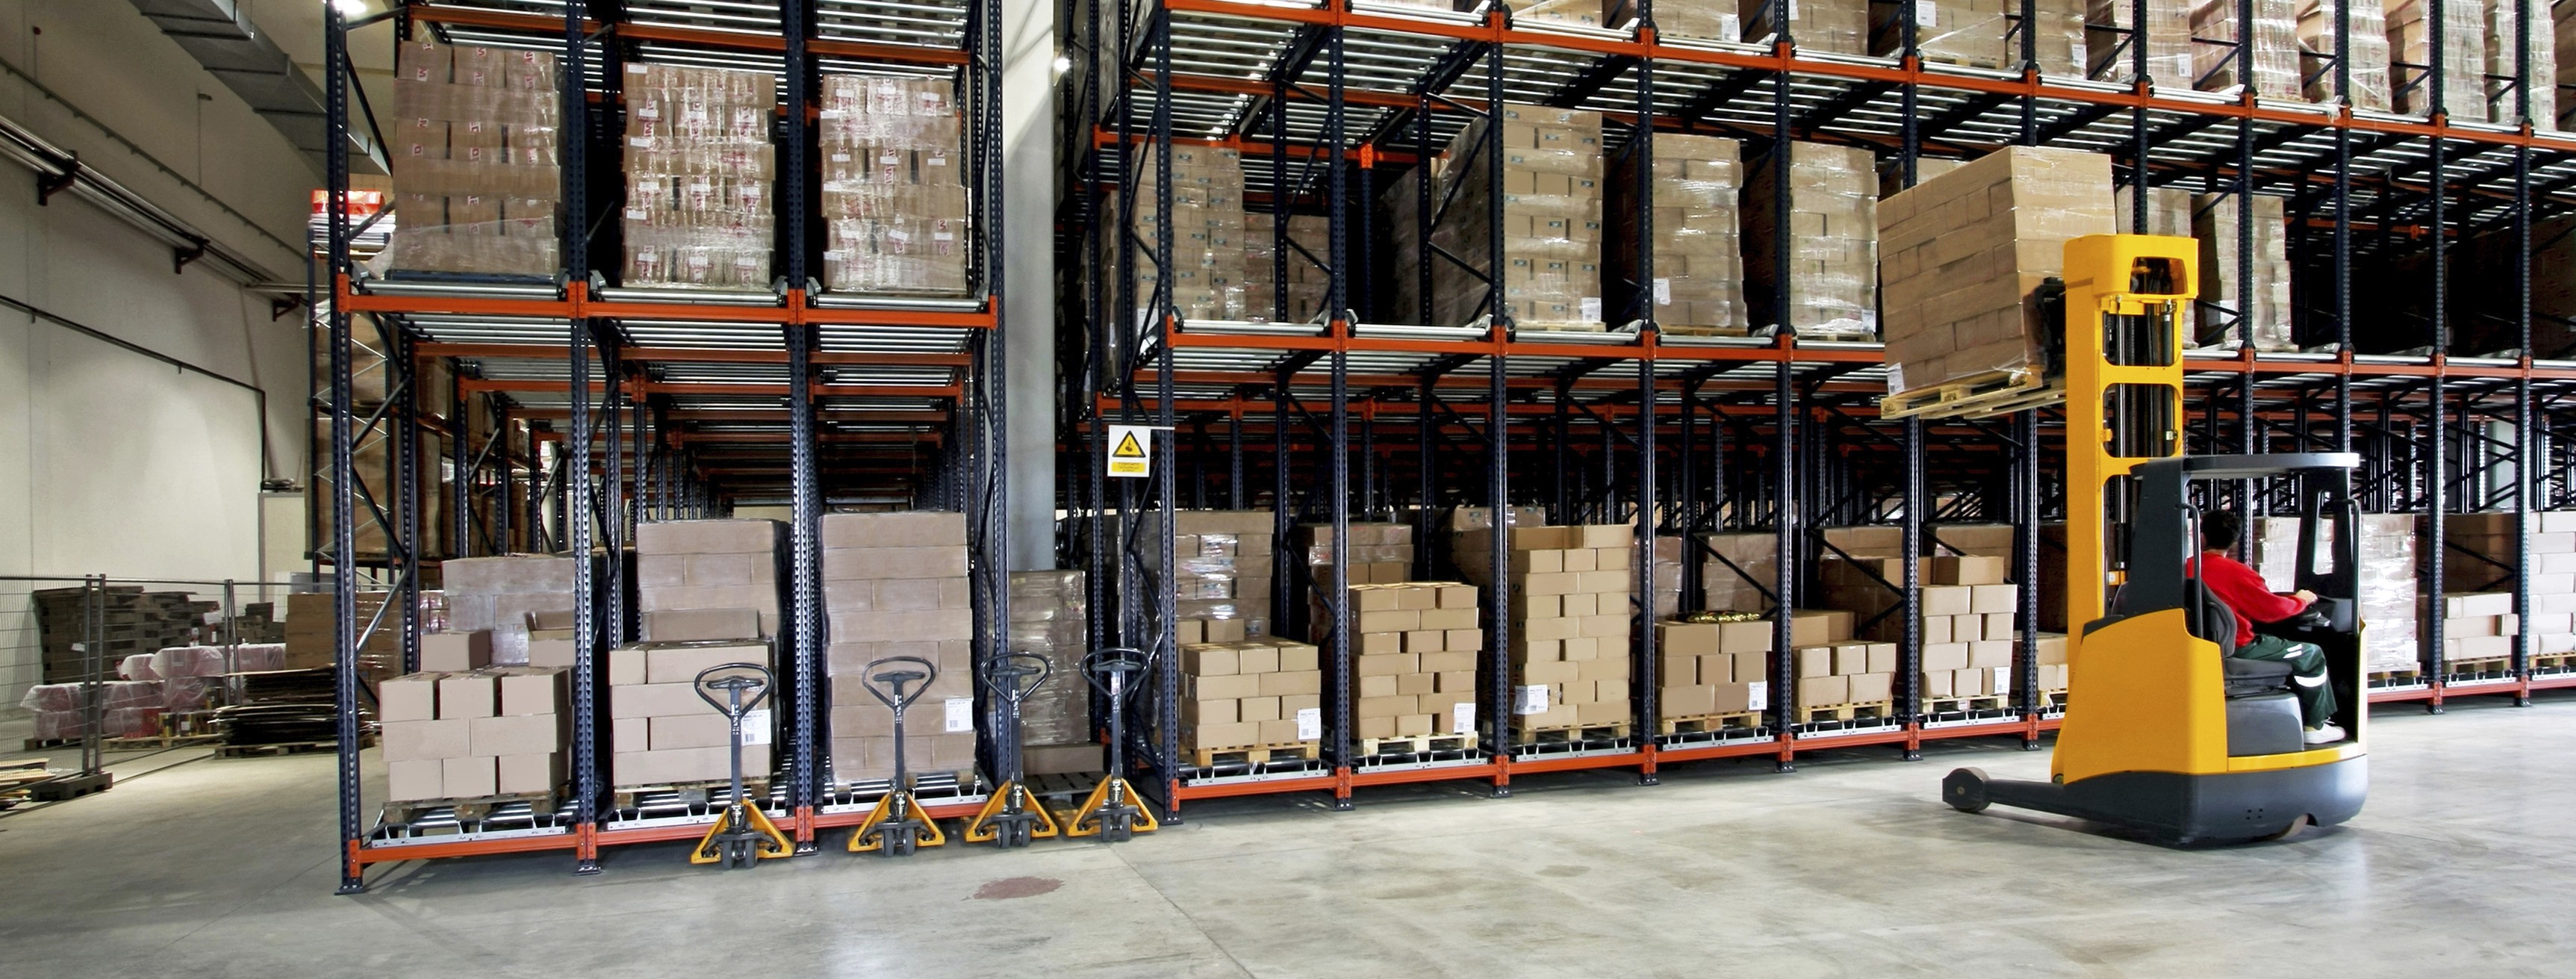 Yellow fork lifter work to remove boxes off shelf in big warehouse